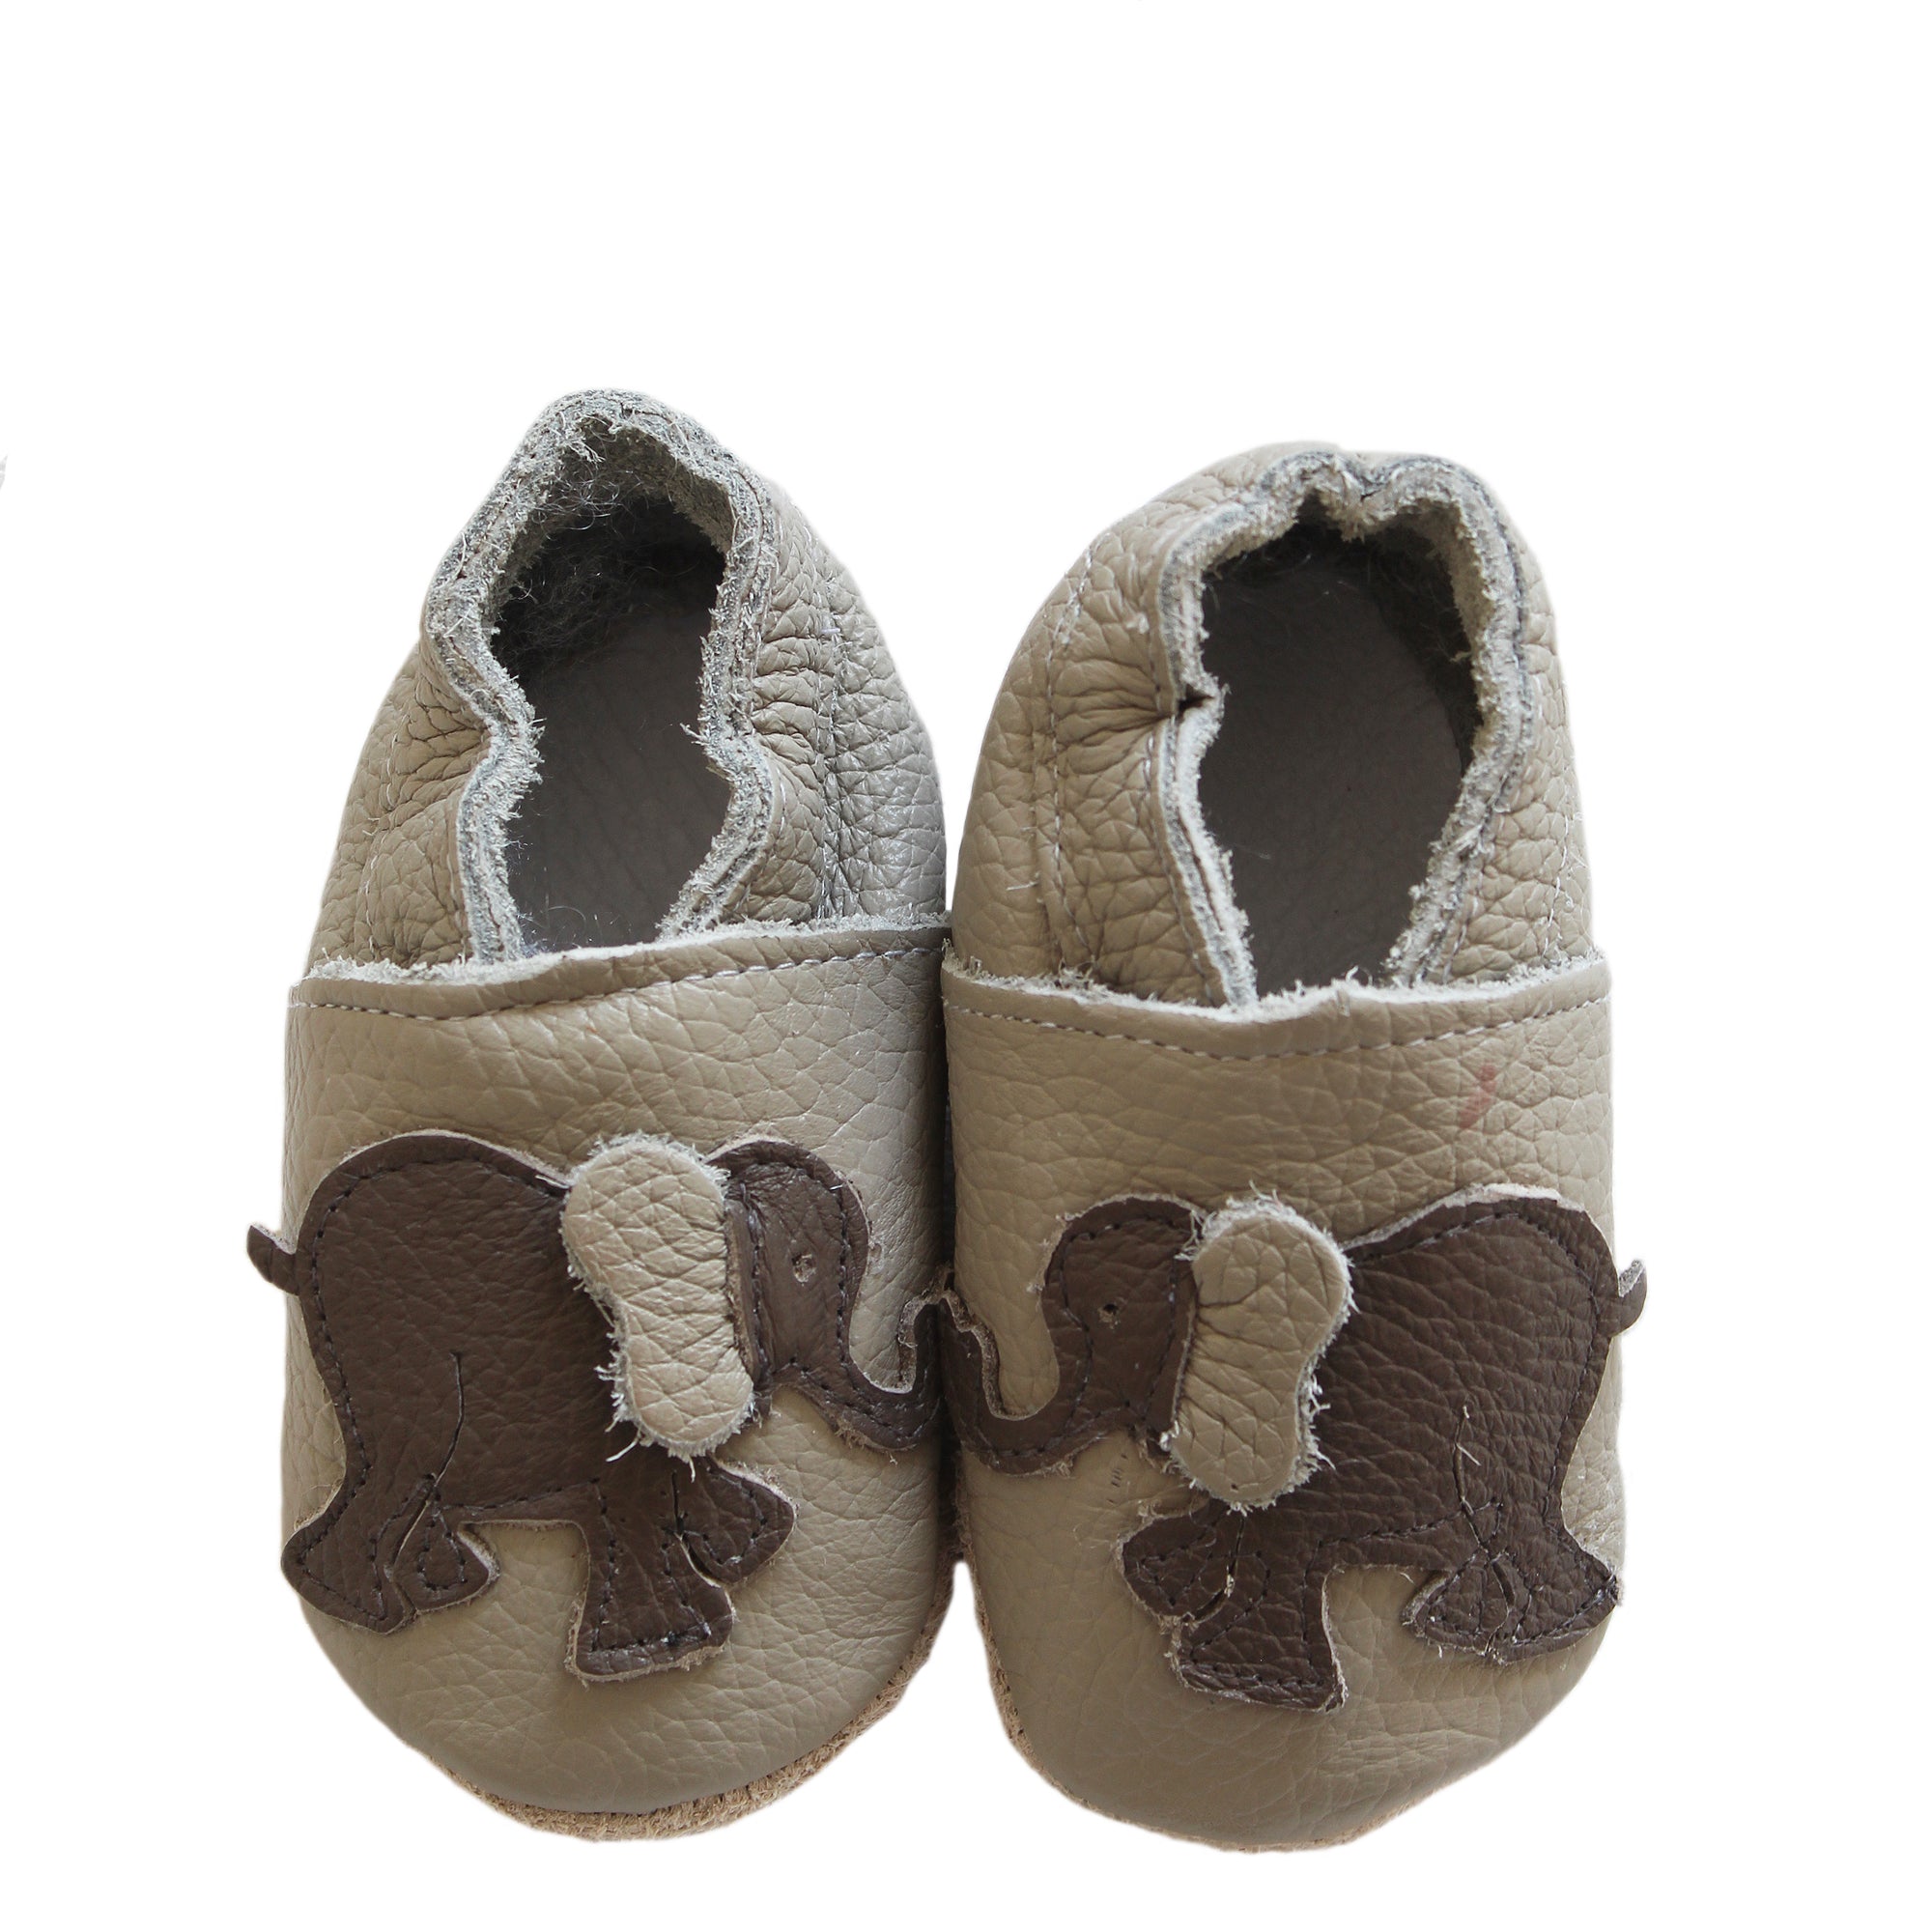 Soft Sole Baby Leather Shoes With On Safari Elephant